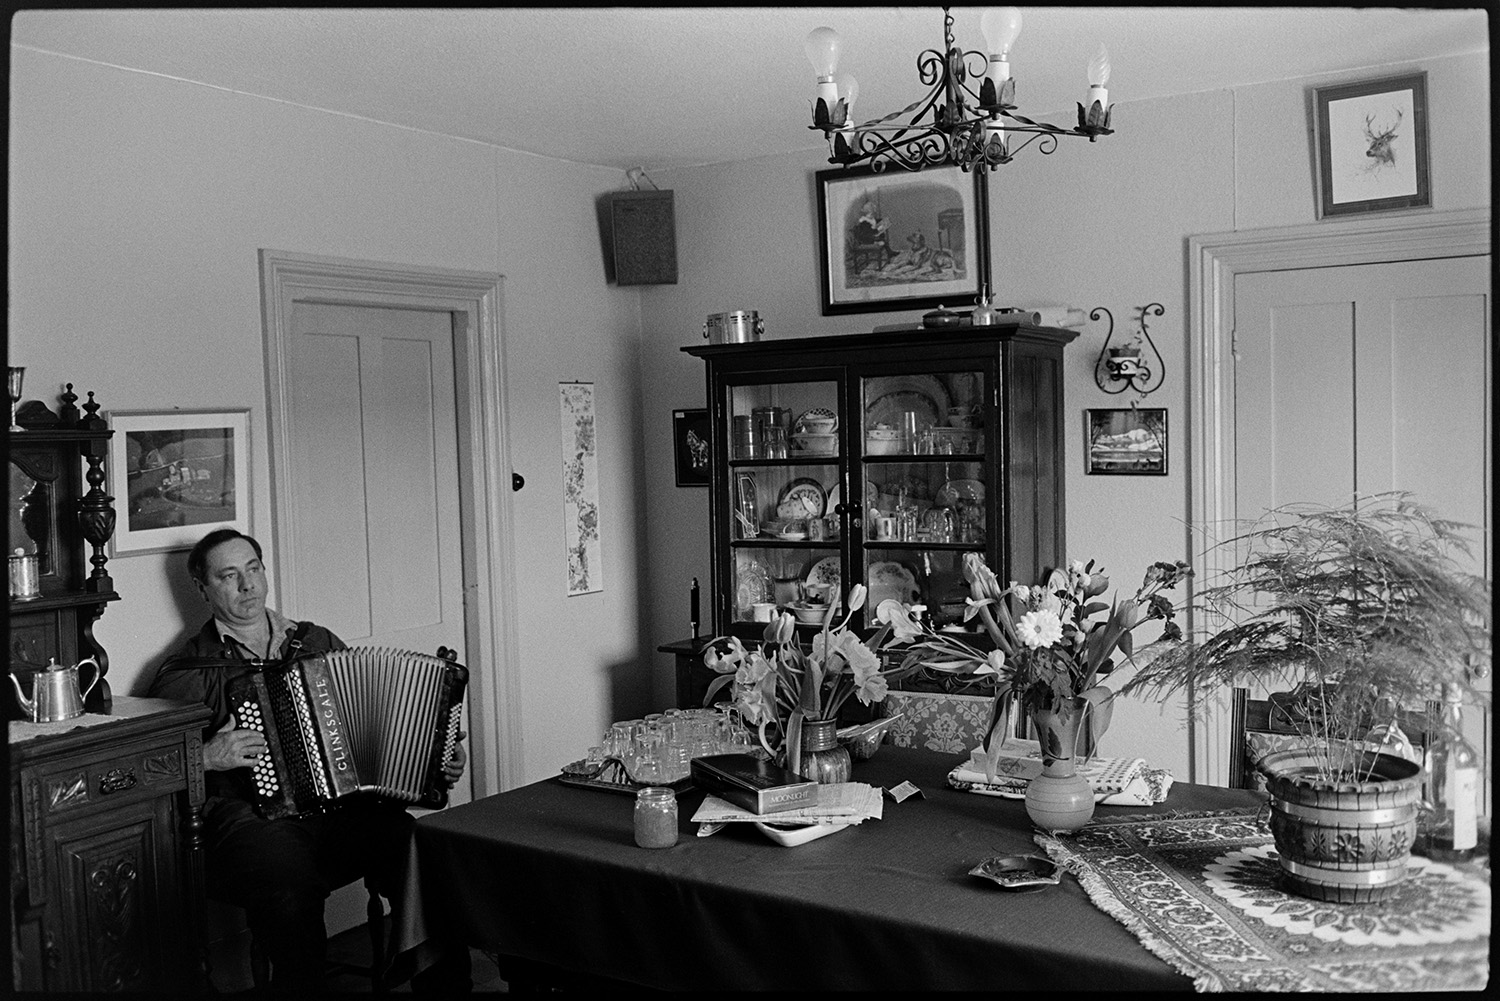 Man with accordion in sitting room, furniture, dresser, table. 
[A man sitting on a chair playing an accordion in a living room with a glass cabinet displaying china and a table with vases of flowers and a pot plant.]